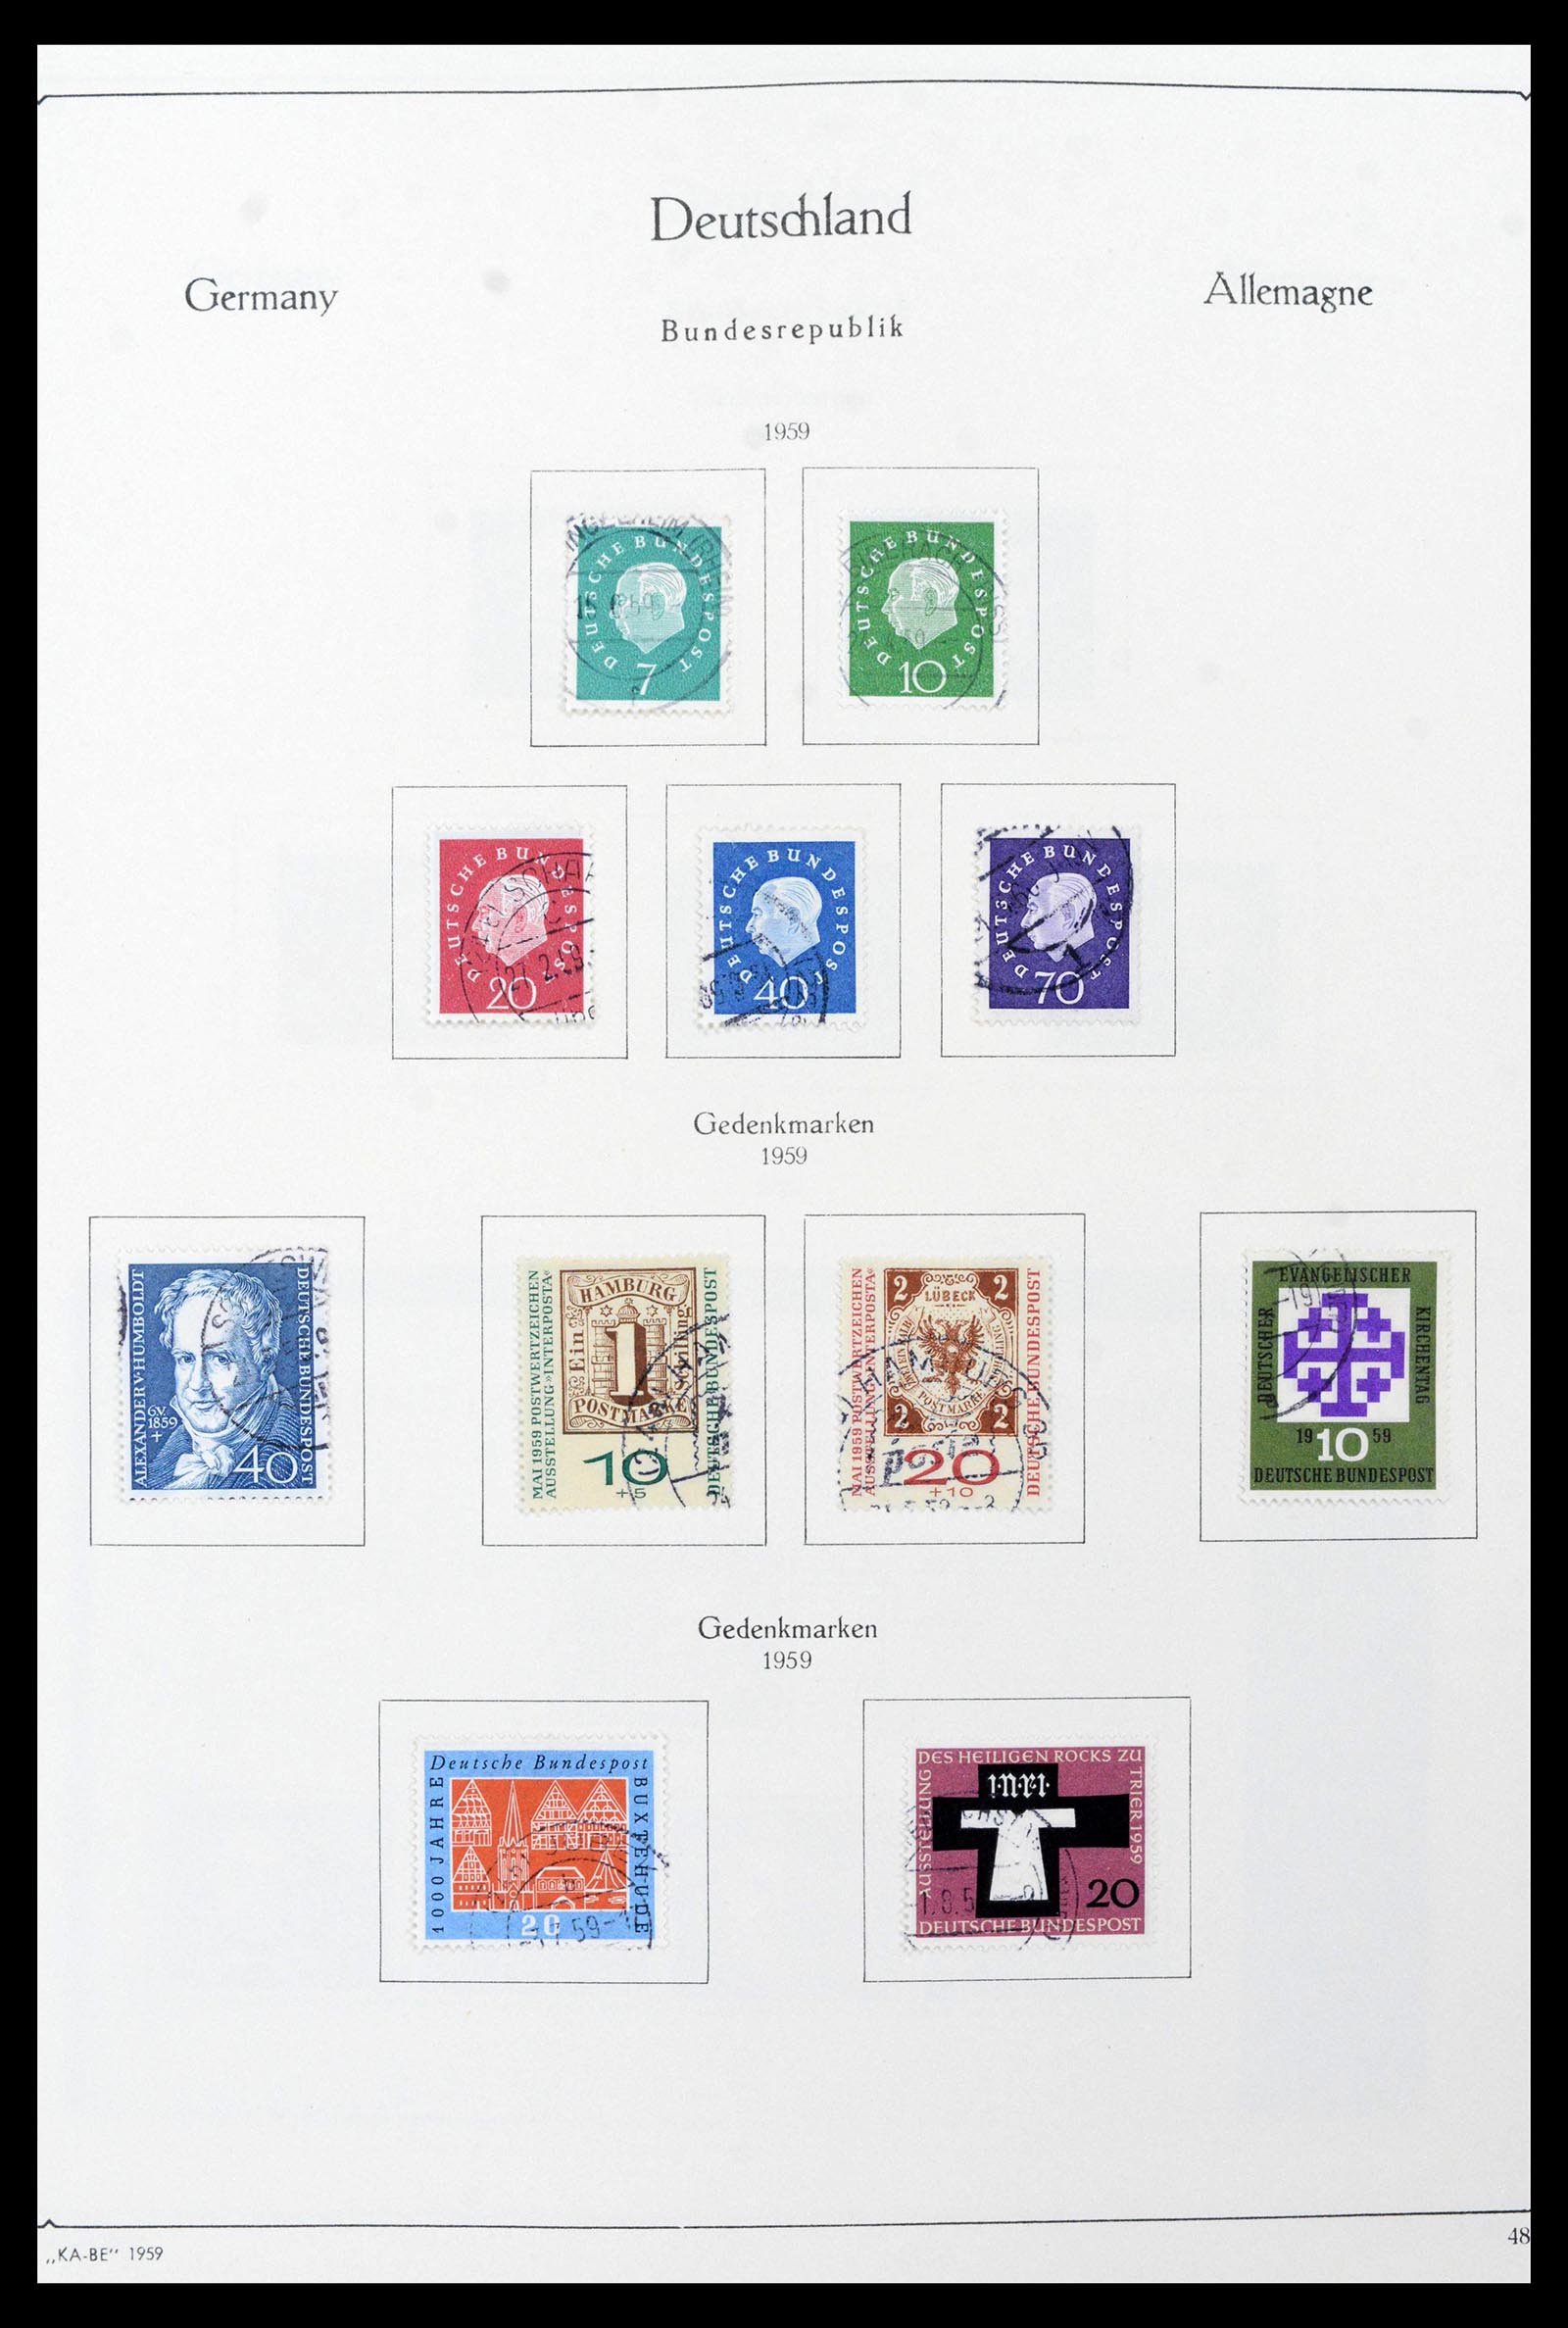 39148 0020 - Stamp collection 39148 Bundespost 1949-1987.